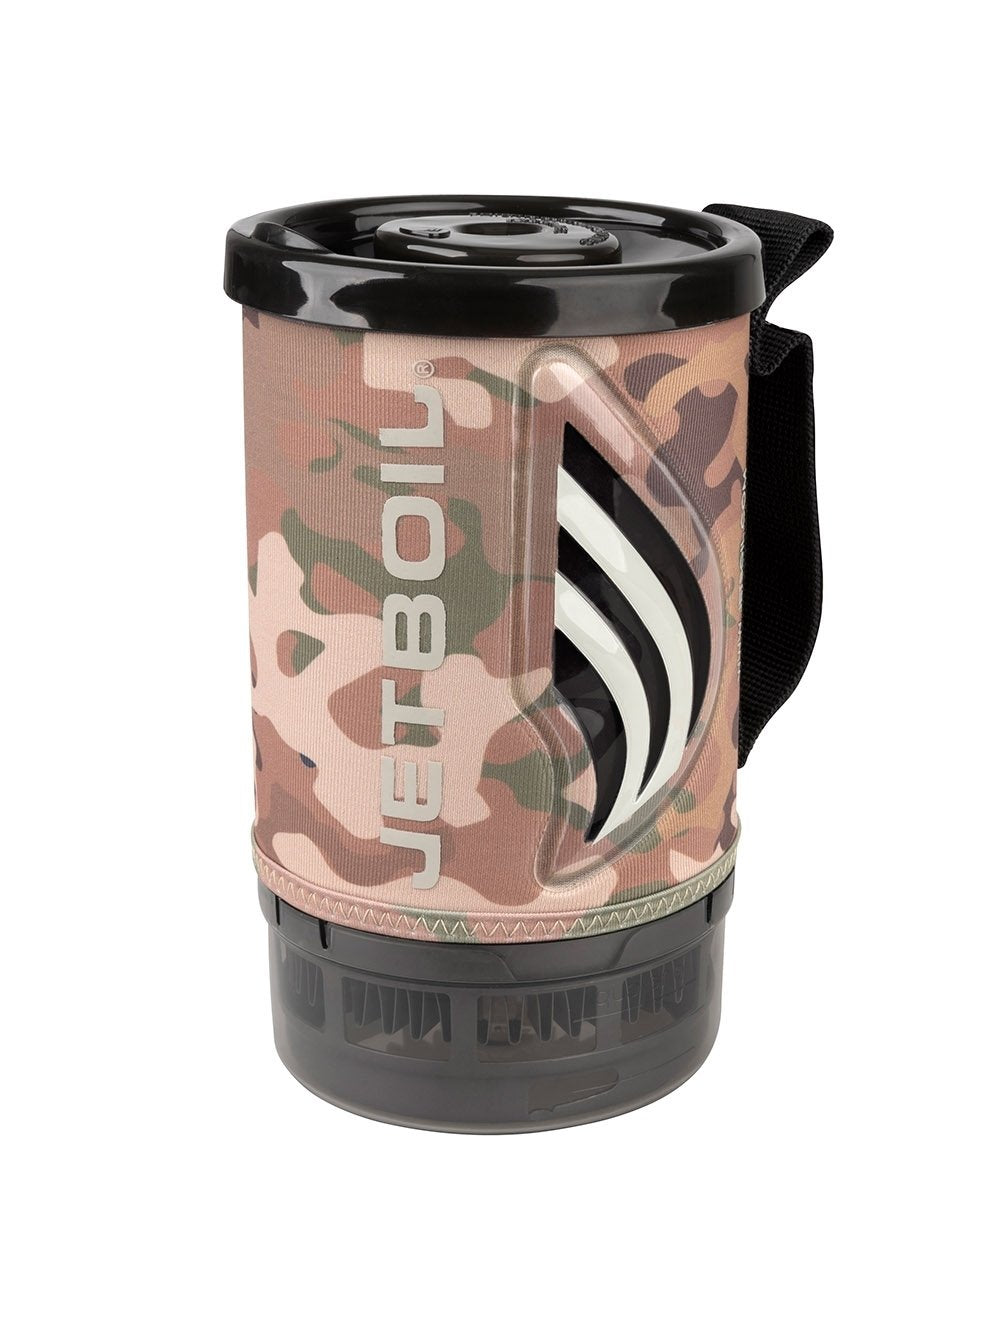 Jetboil Flash Complete Cooking System Outdoor and Survival Products Jetboil Camo Tactical Gear Supplier Tactical Distributors Australia